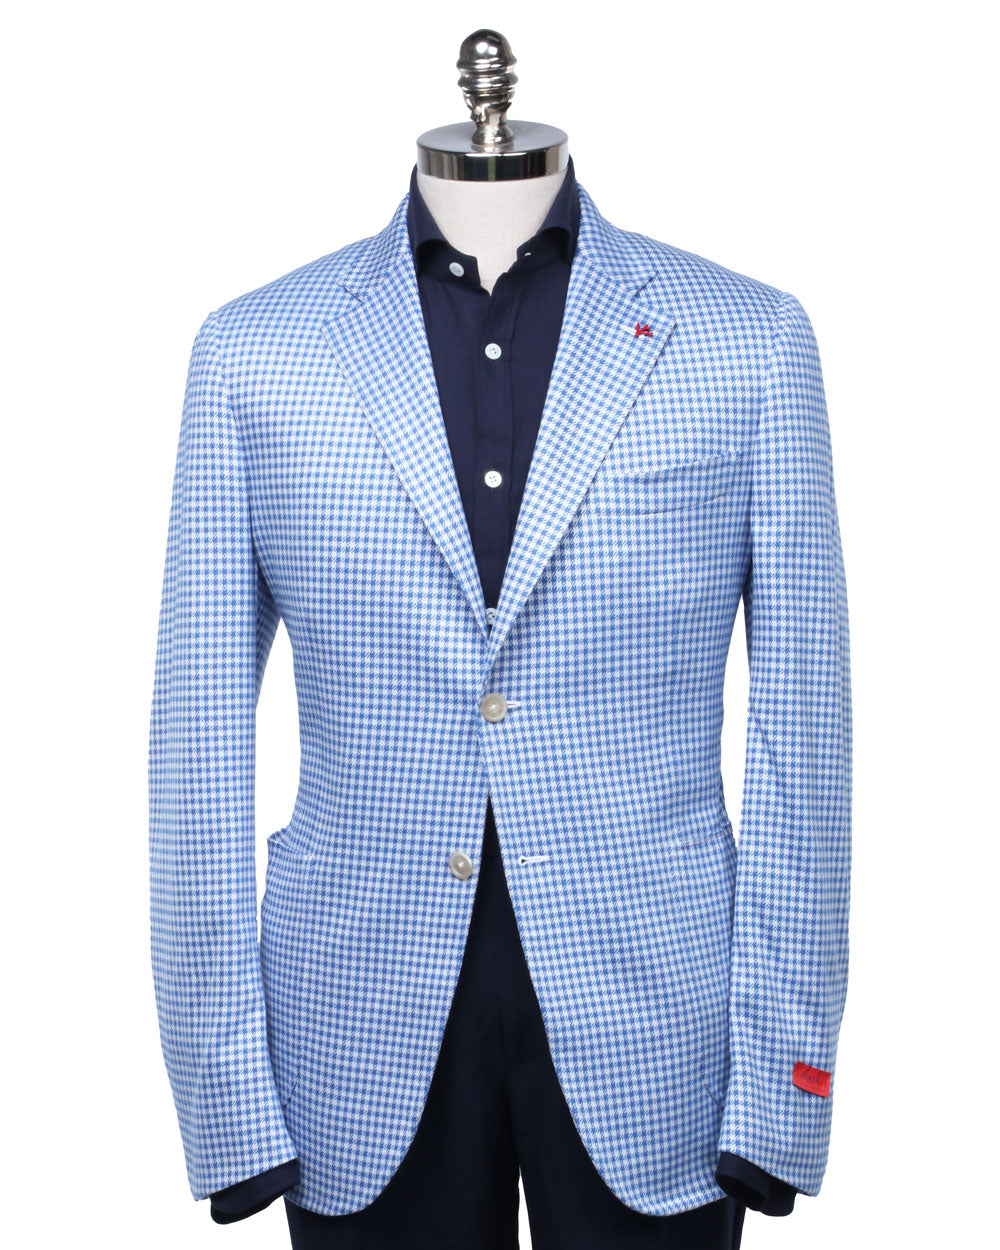 Royal Blue and White Houndstooth Capri Sportcoat